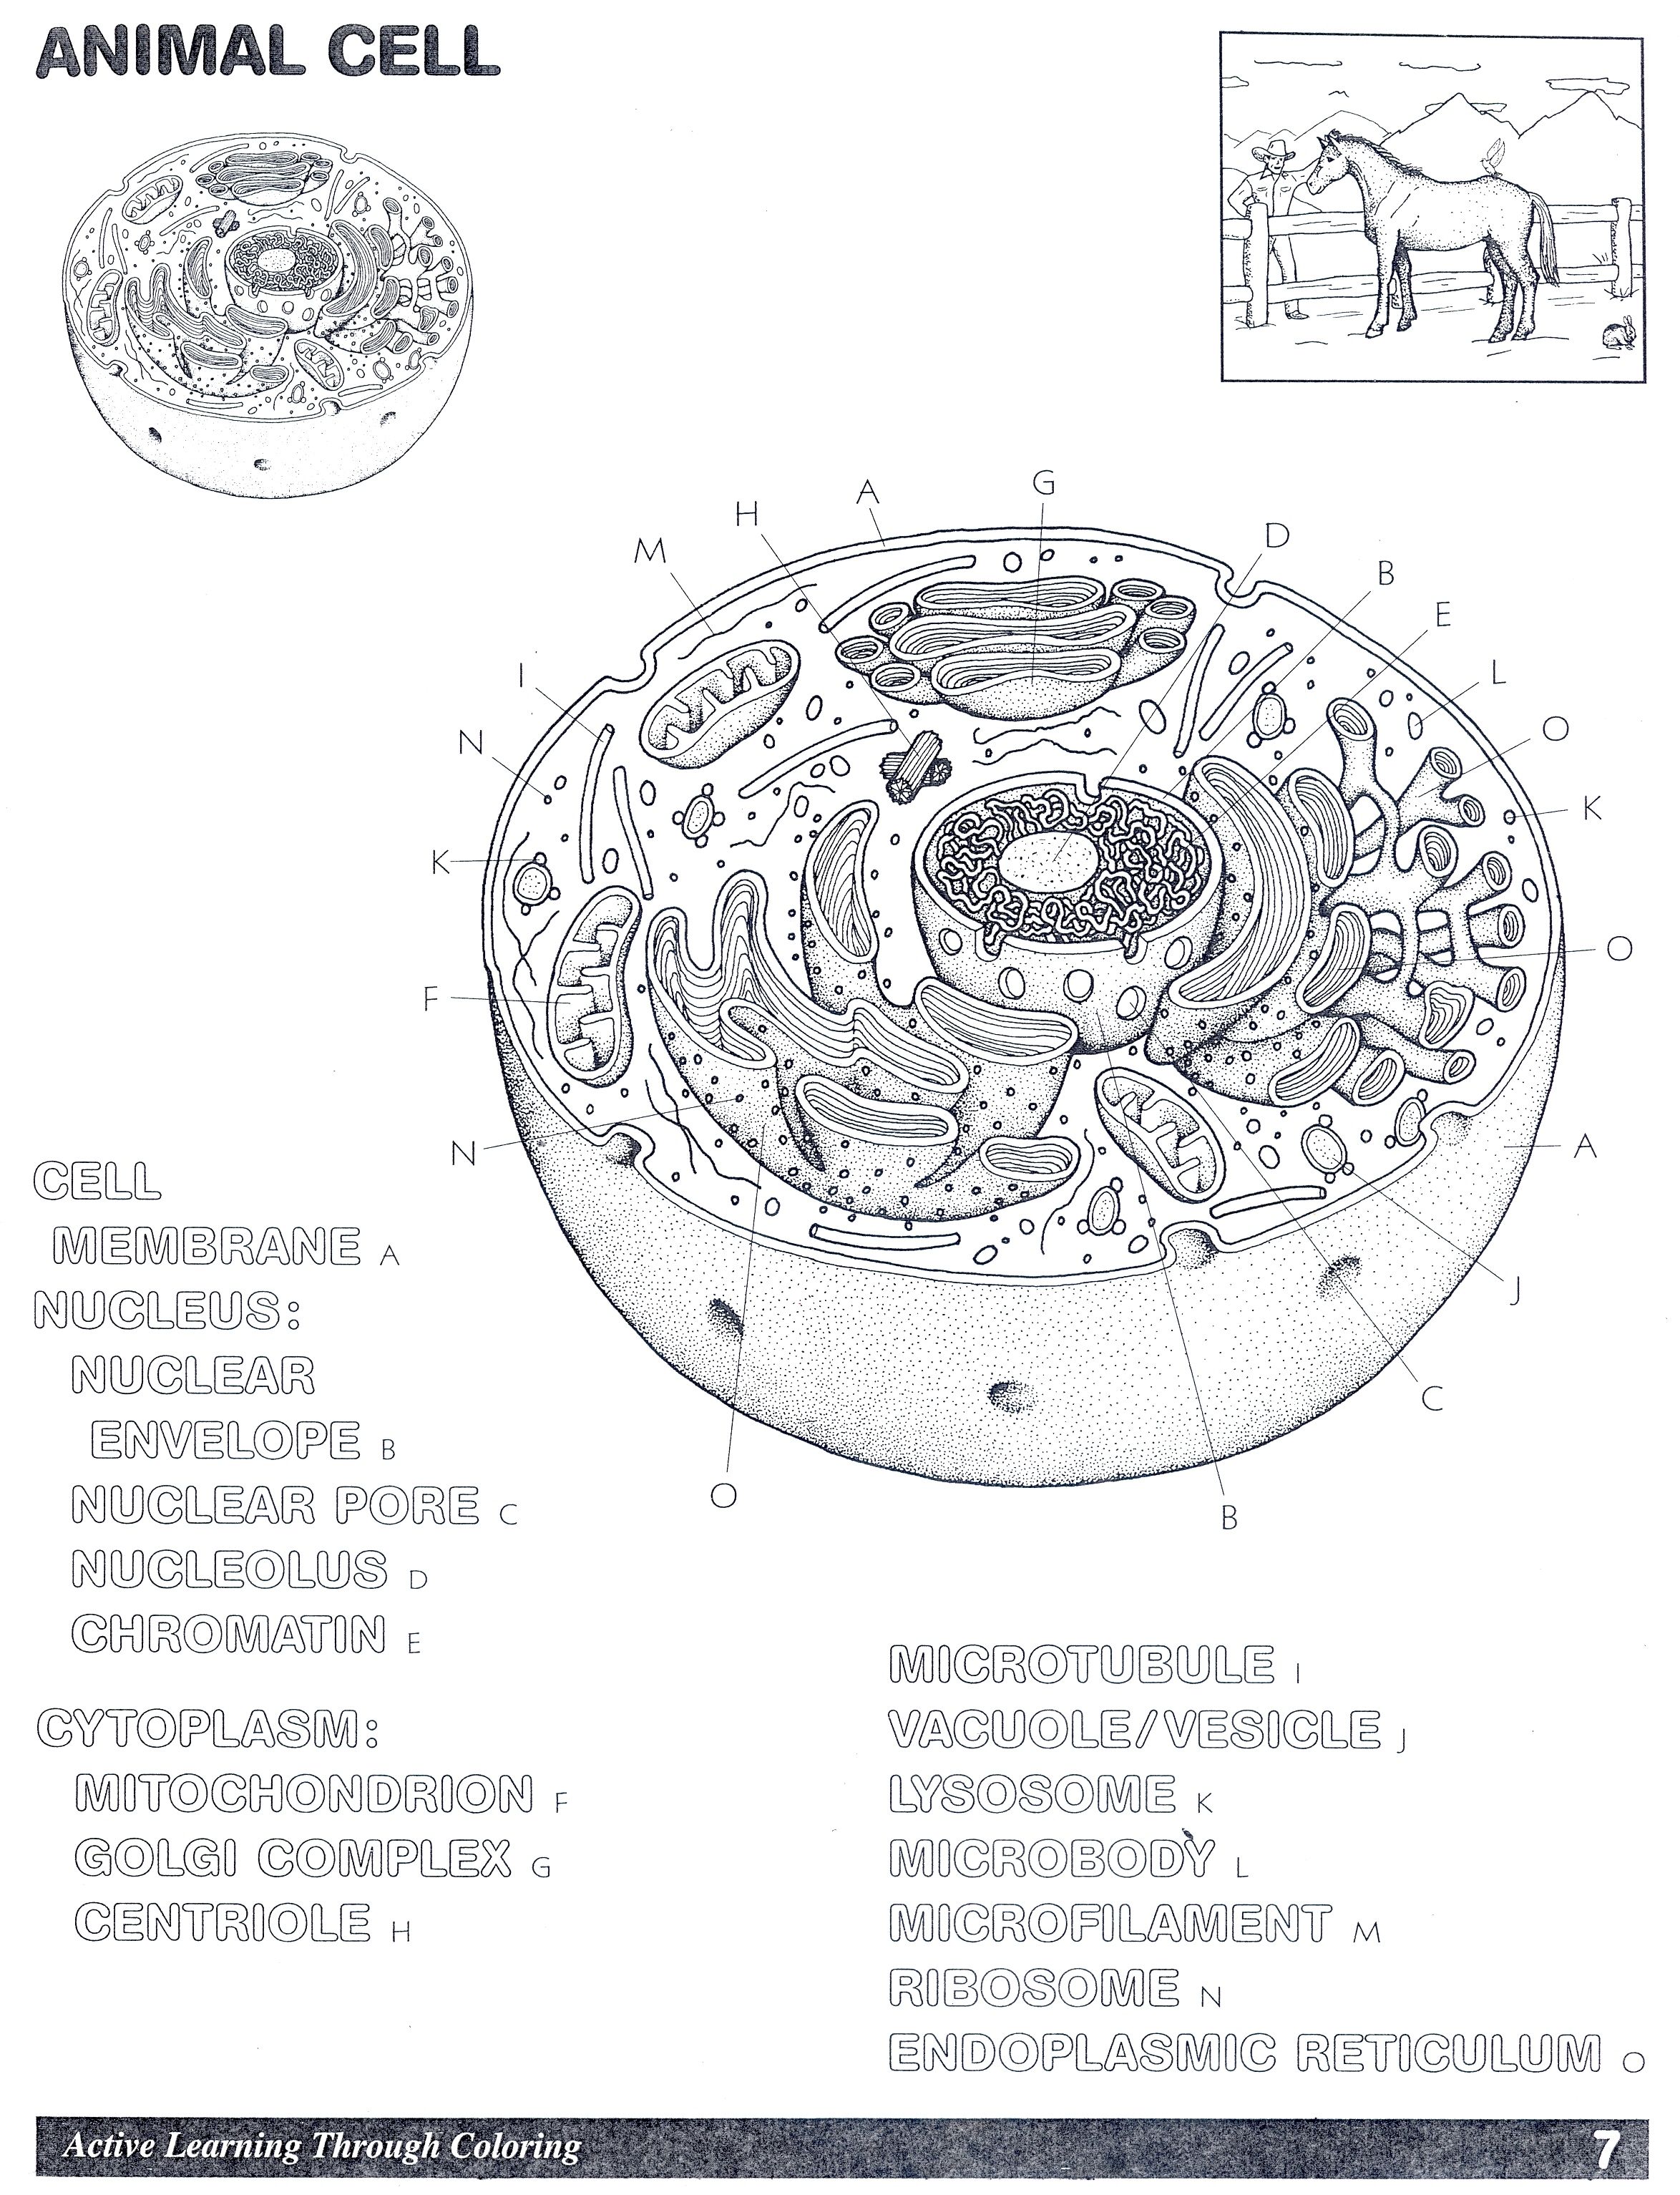 Animal Cell - Coloring Home Throughout Animal Cell Coloring Worksheet